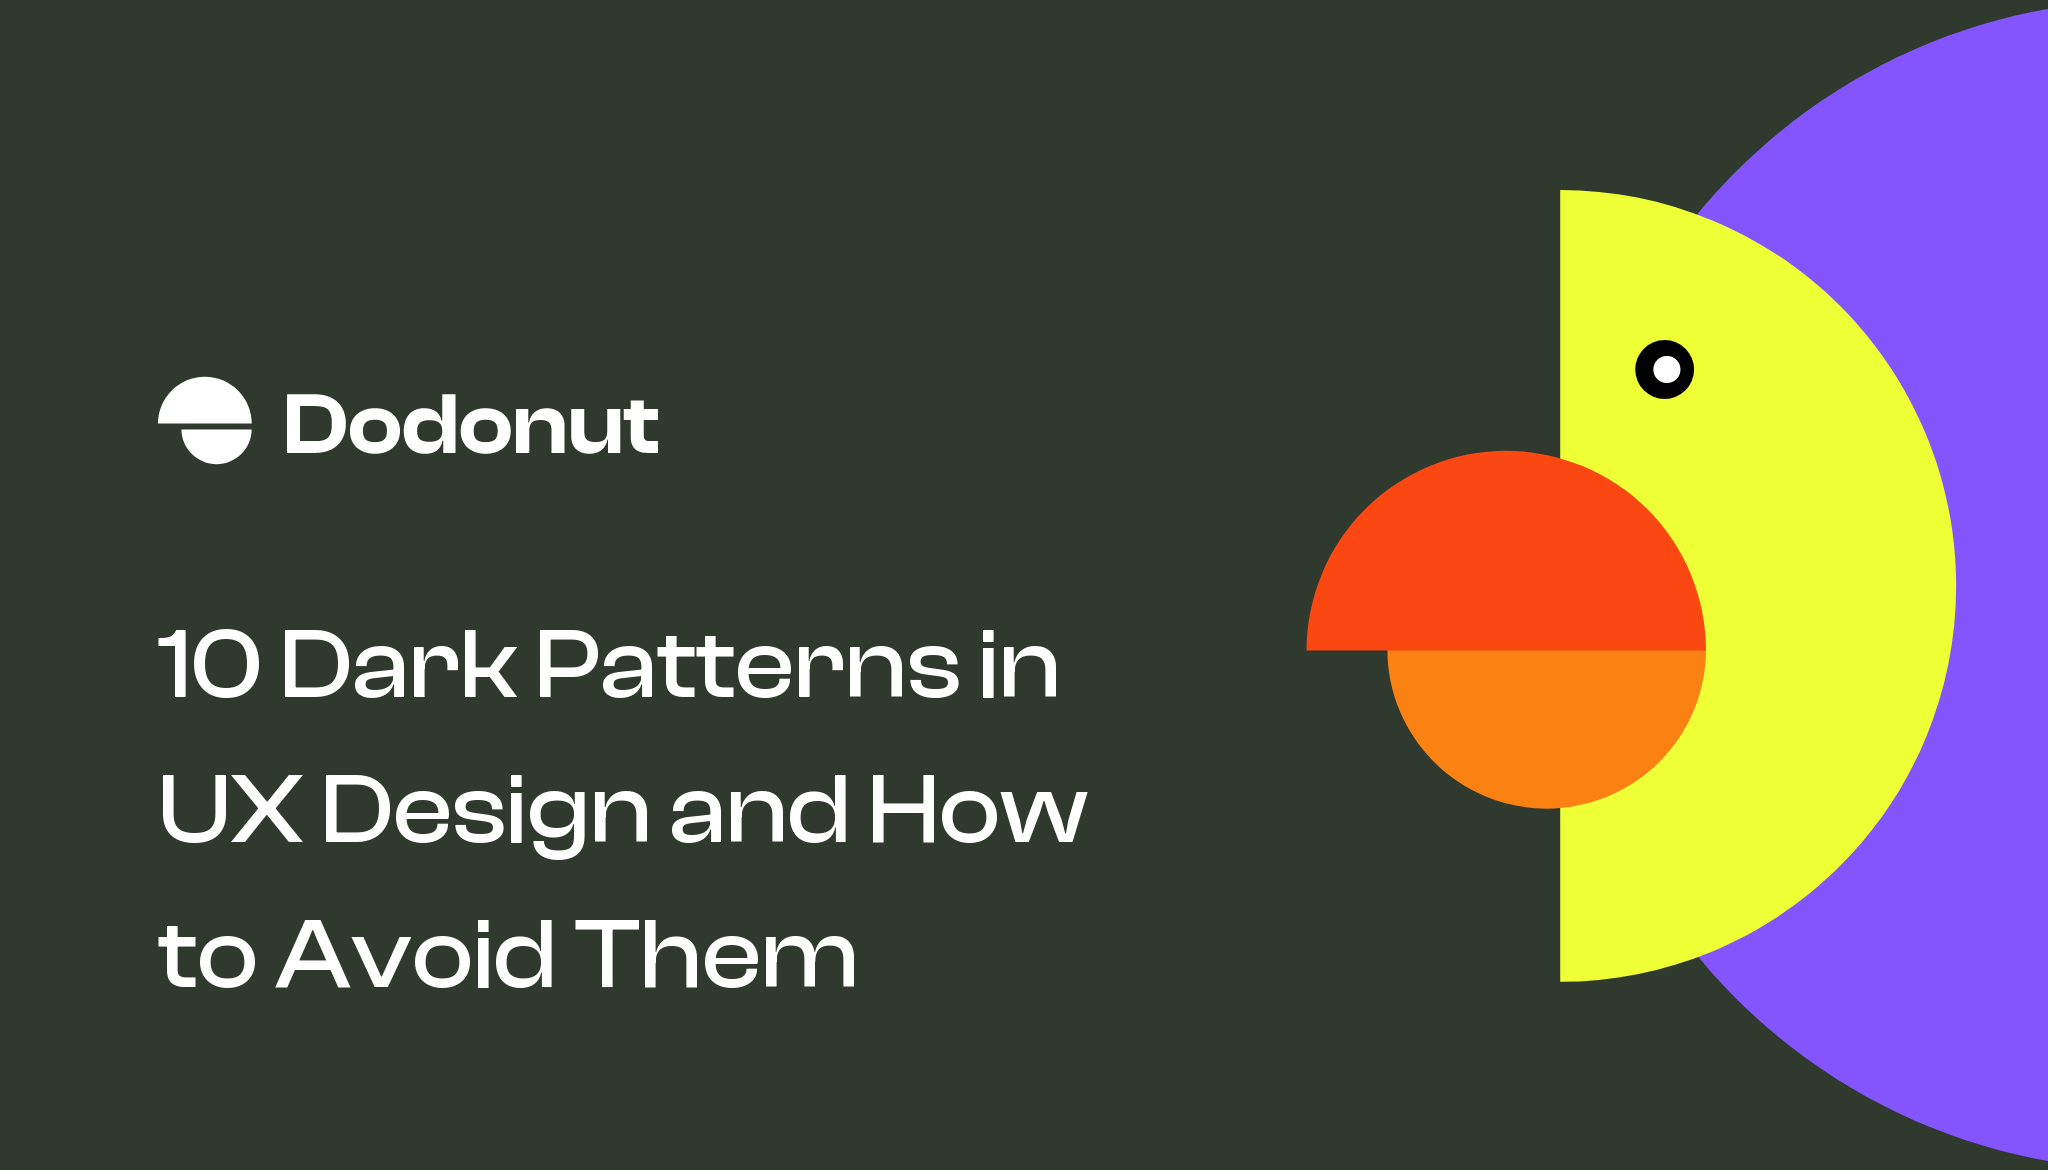 What are deceptive design patterns and how can you spot them?